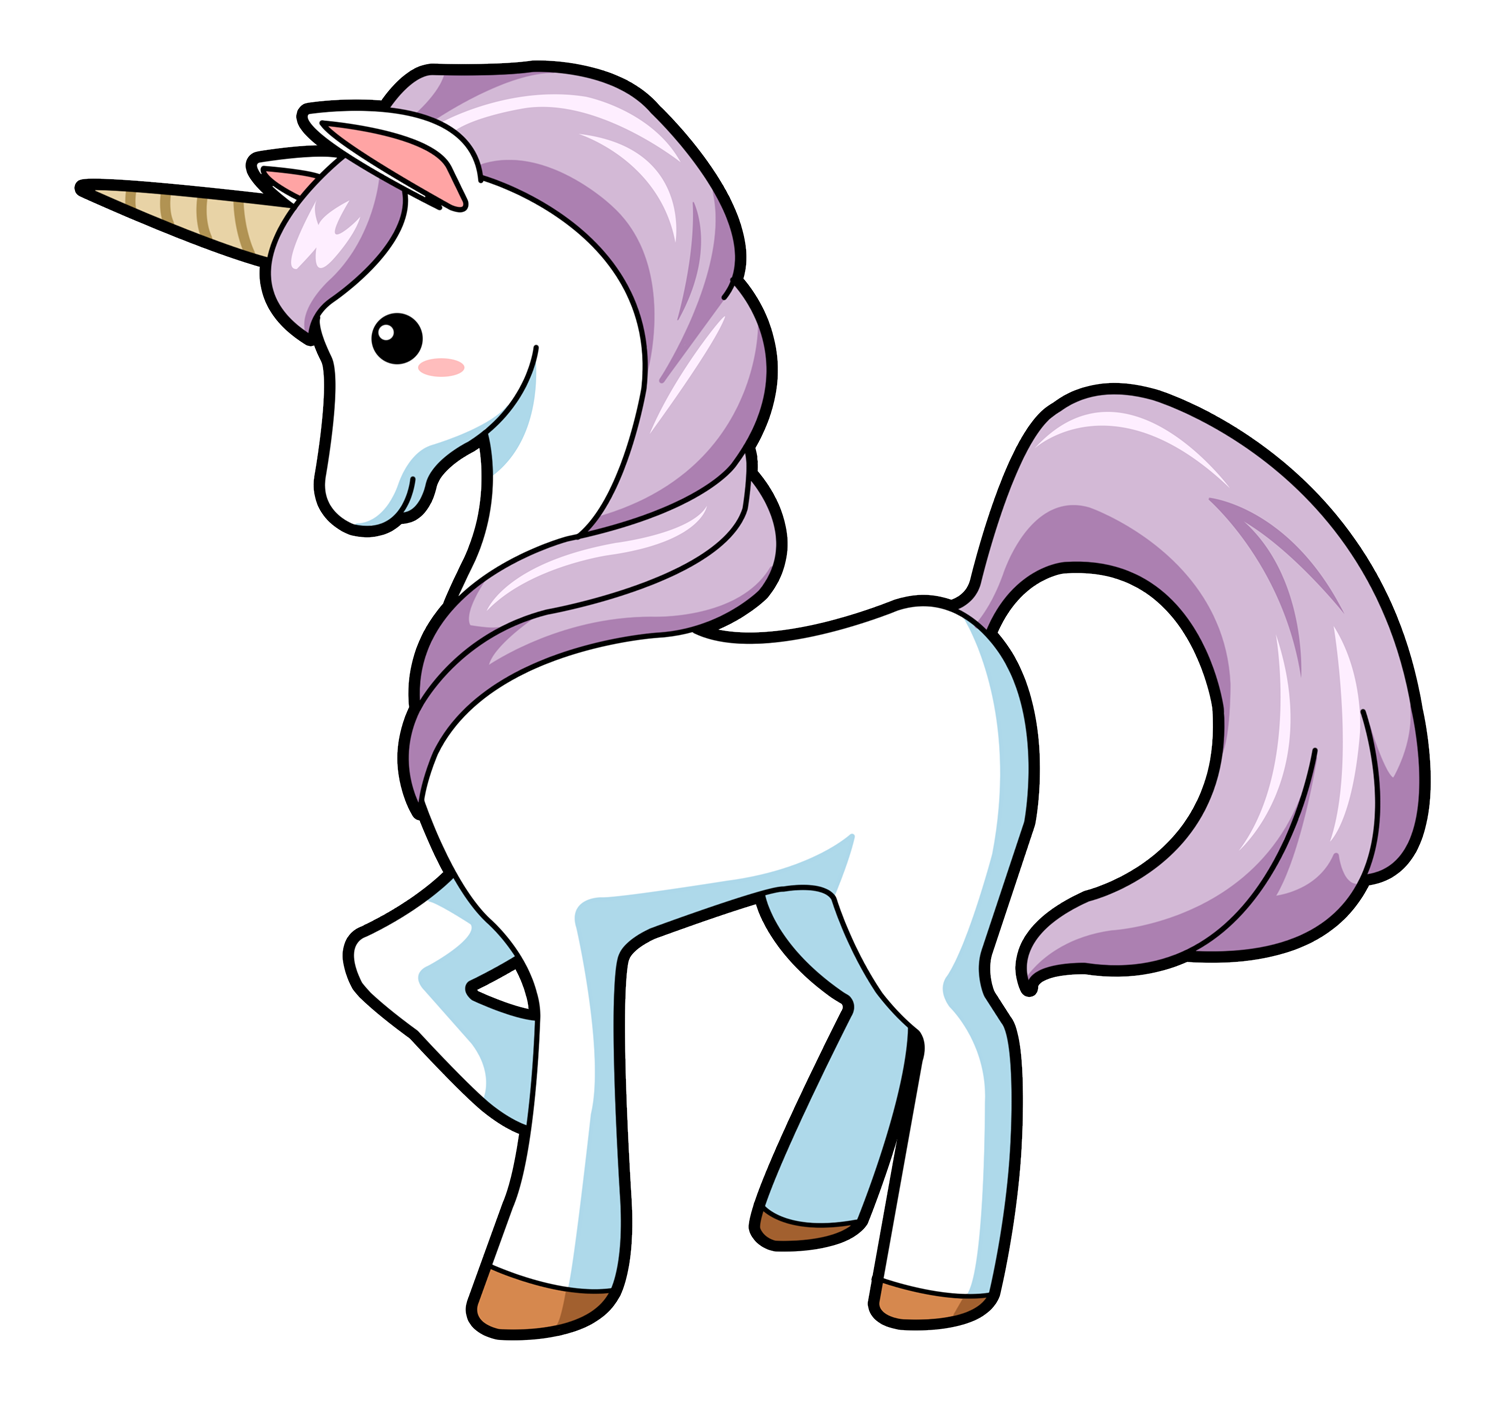 You can use this lovely cartoon unicorn clip art on your personal or commercial projects. Add life to your fantasy projects, storybook illustrations, ...